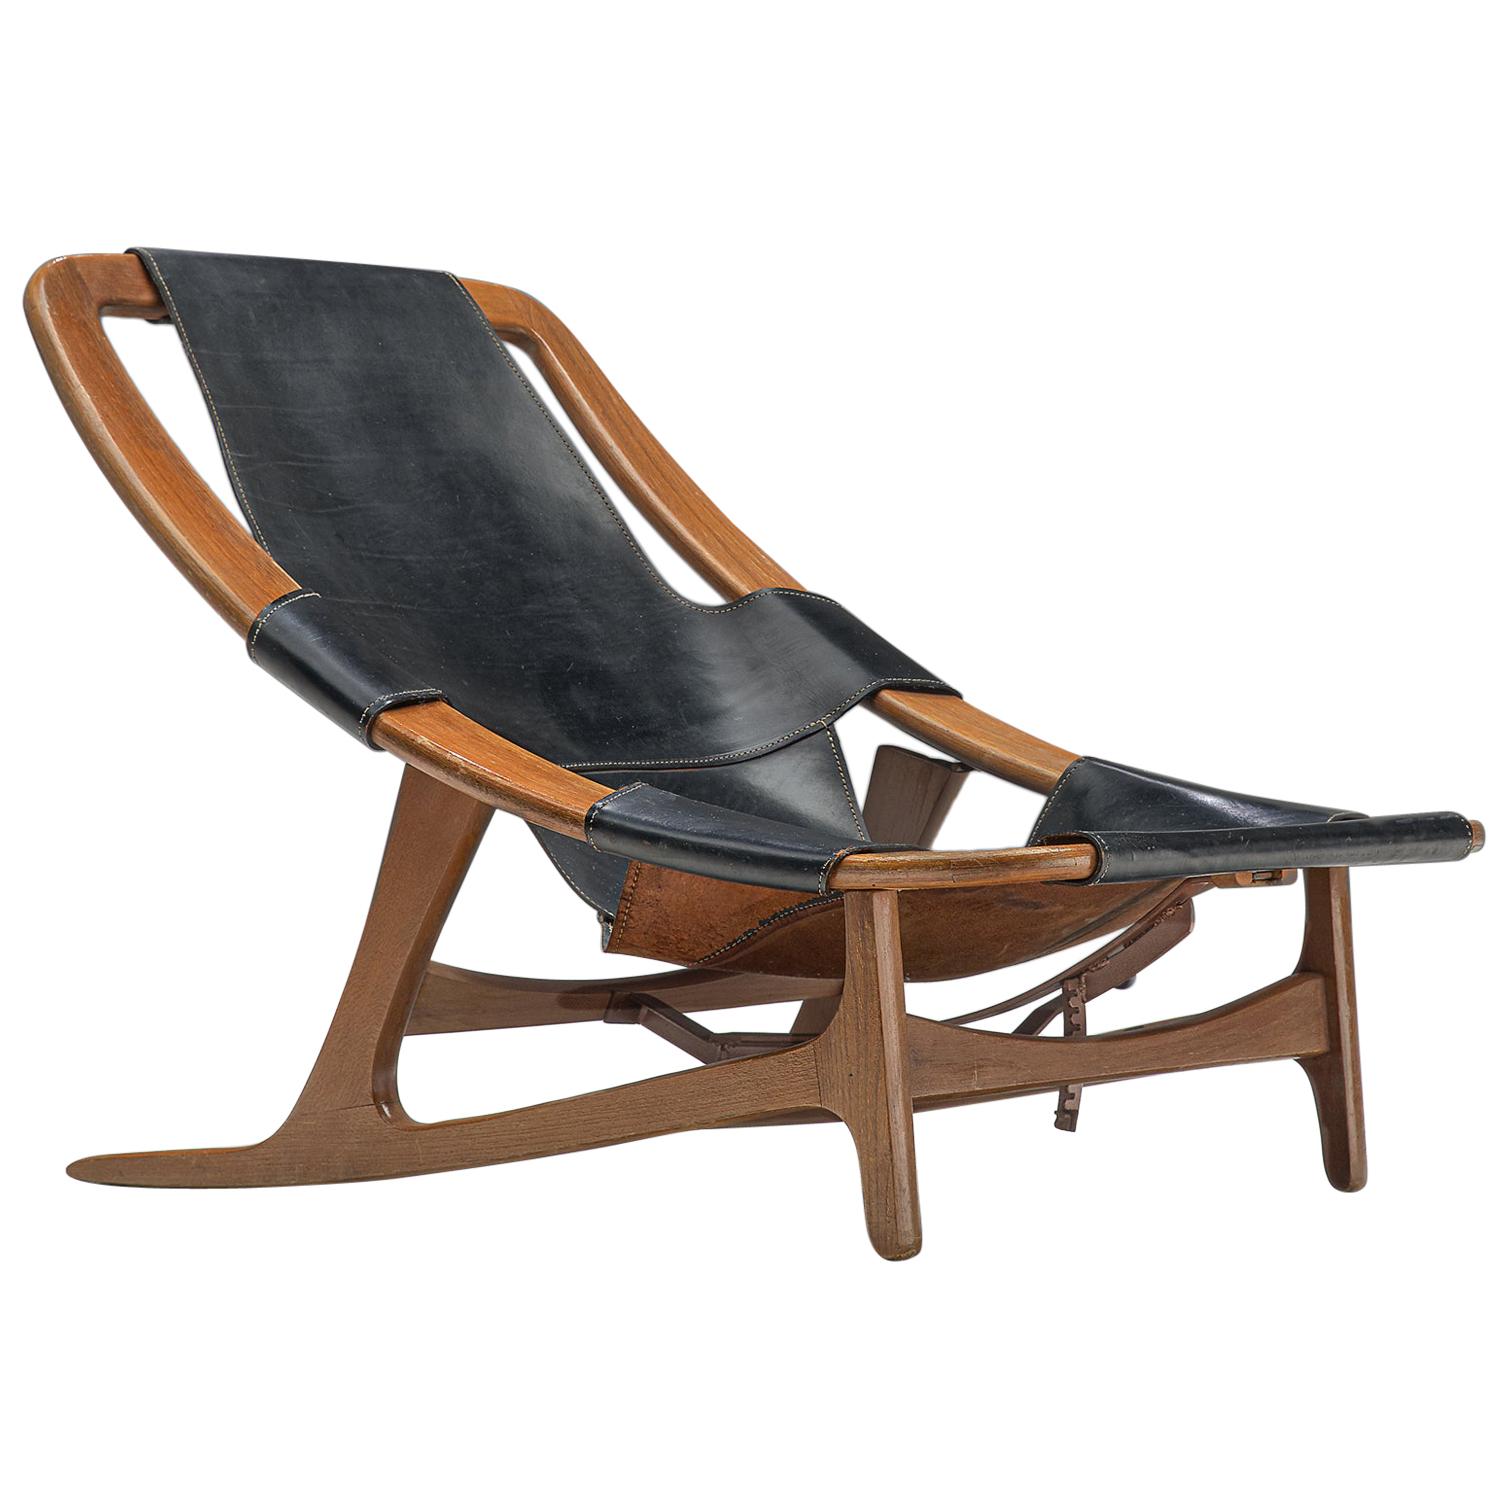 Arne Tidemand Ruud for Norcraft 'Holmkollen' Lounge Chair in Black Leather